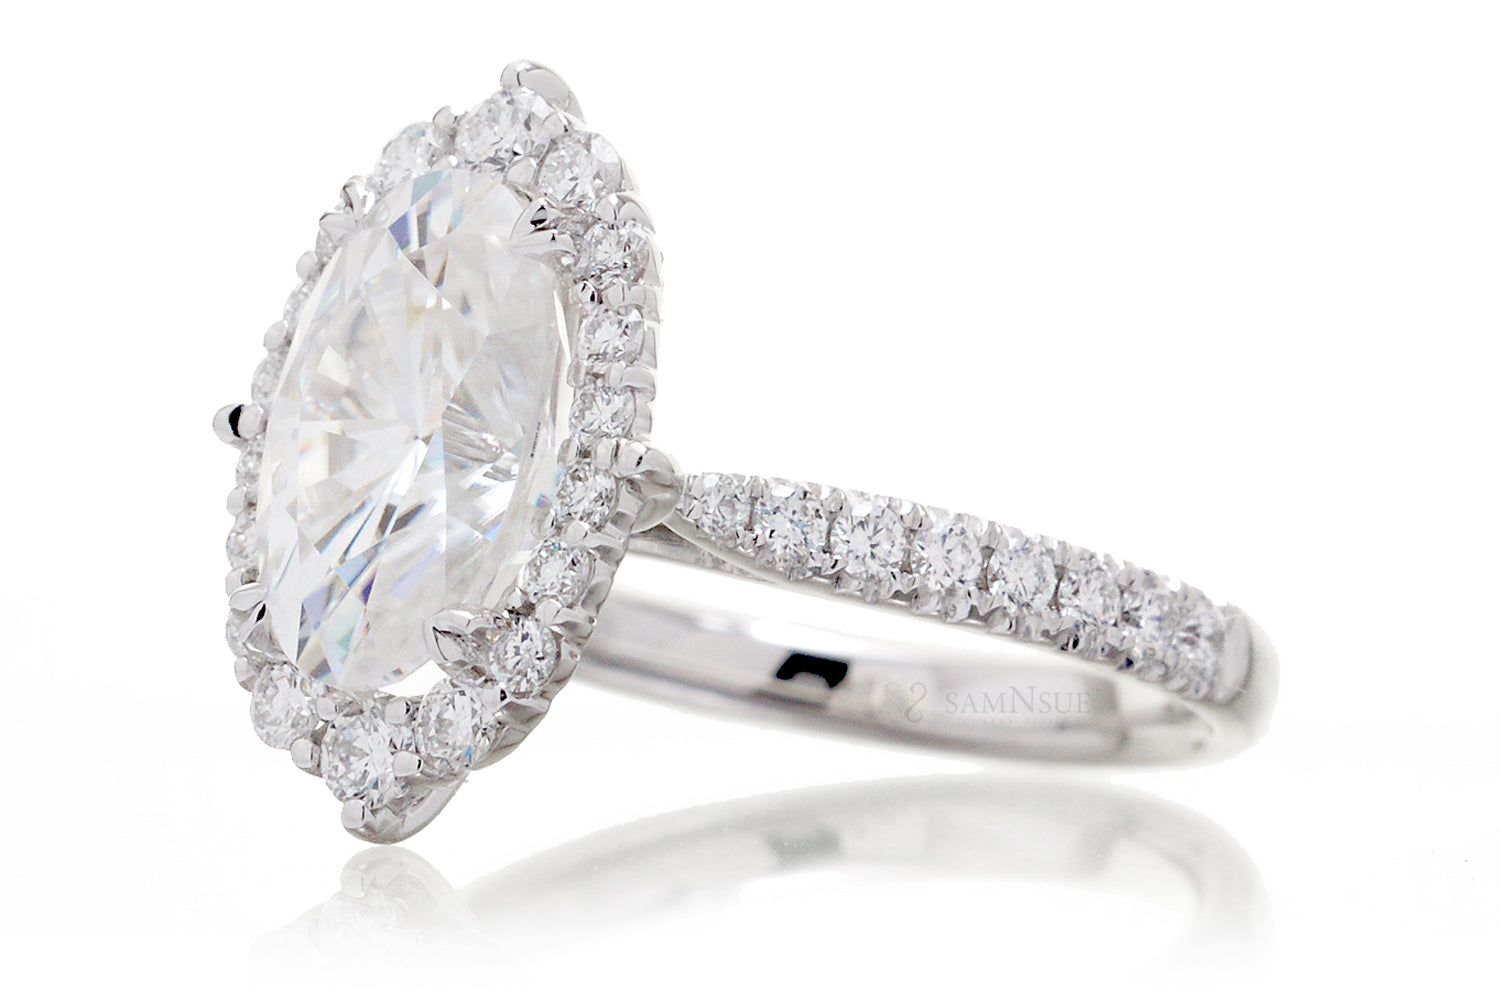 The Haley Oval Moissanite Ring